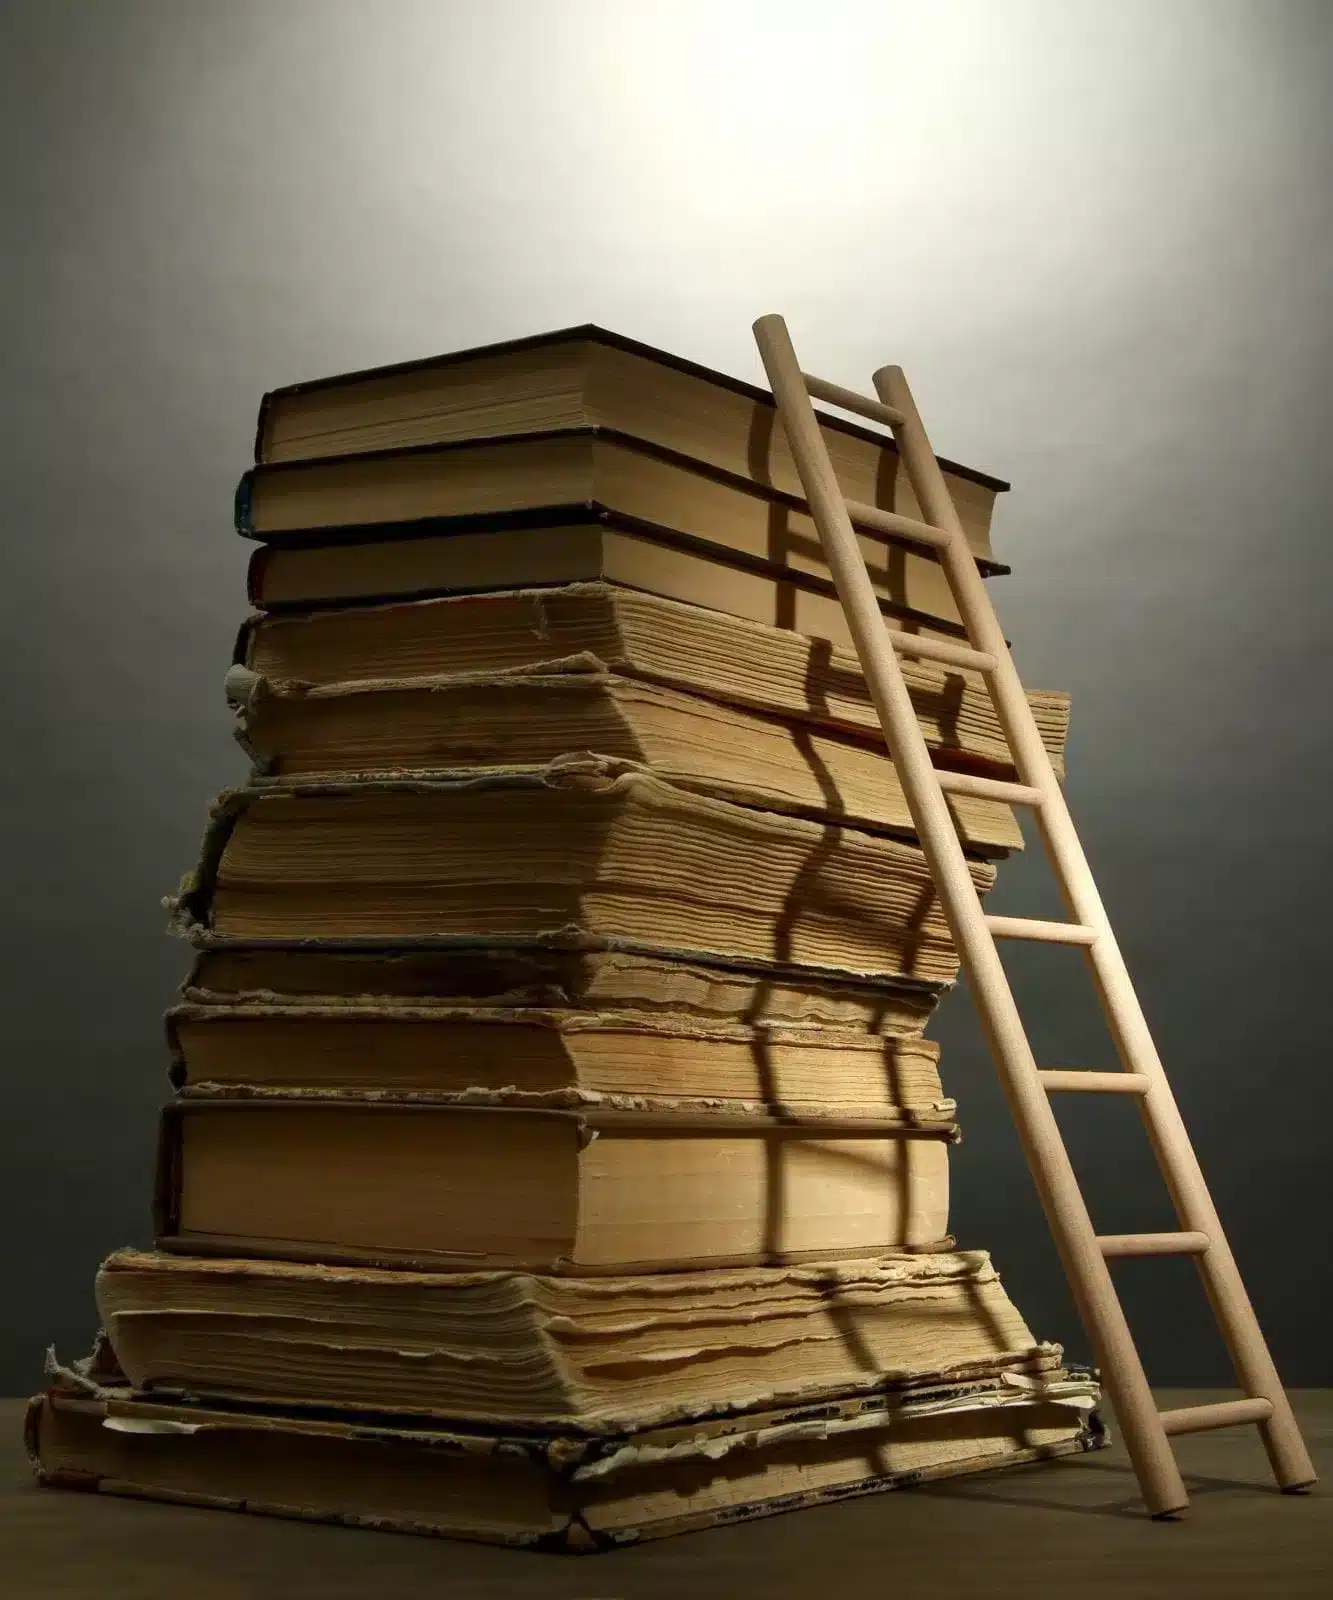 Book Stacks like tower with ladder